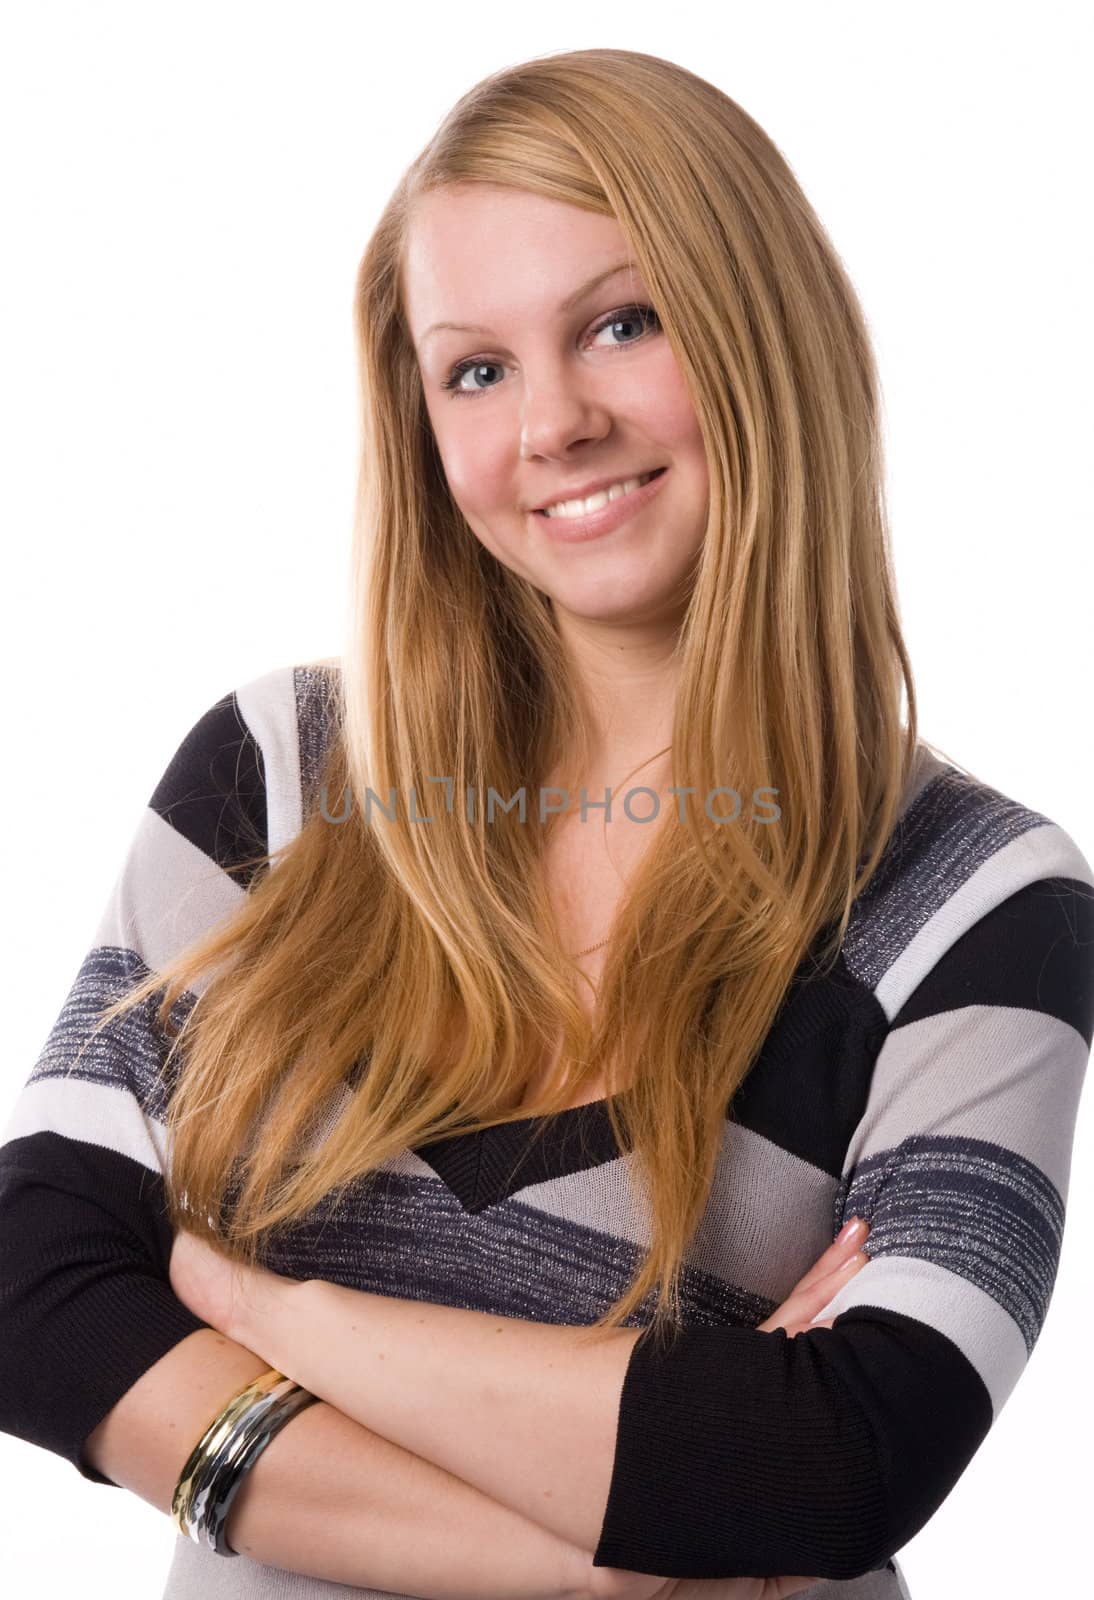 A smiling blonde isolated on white background.